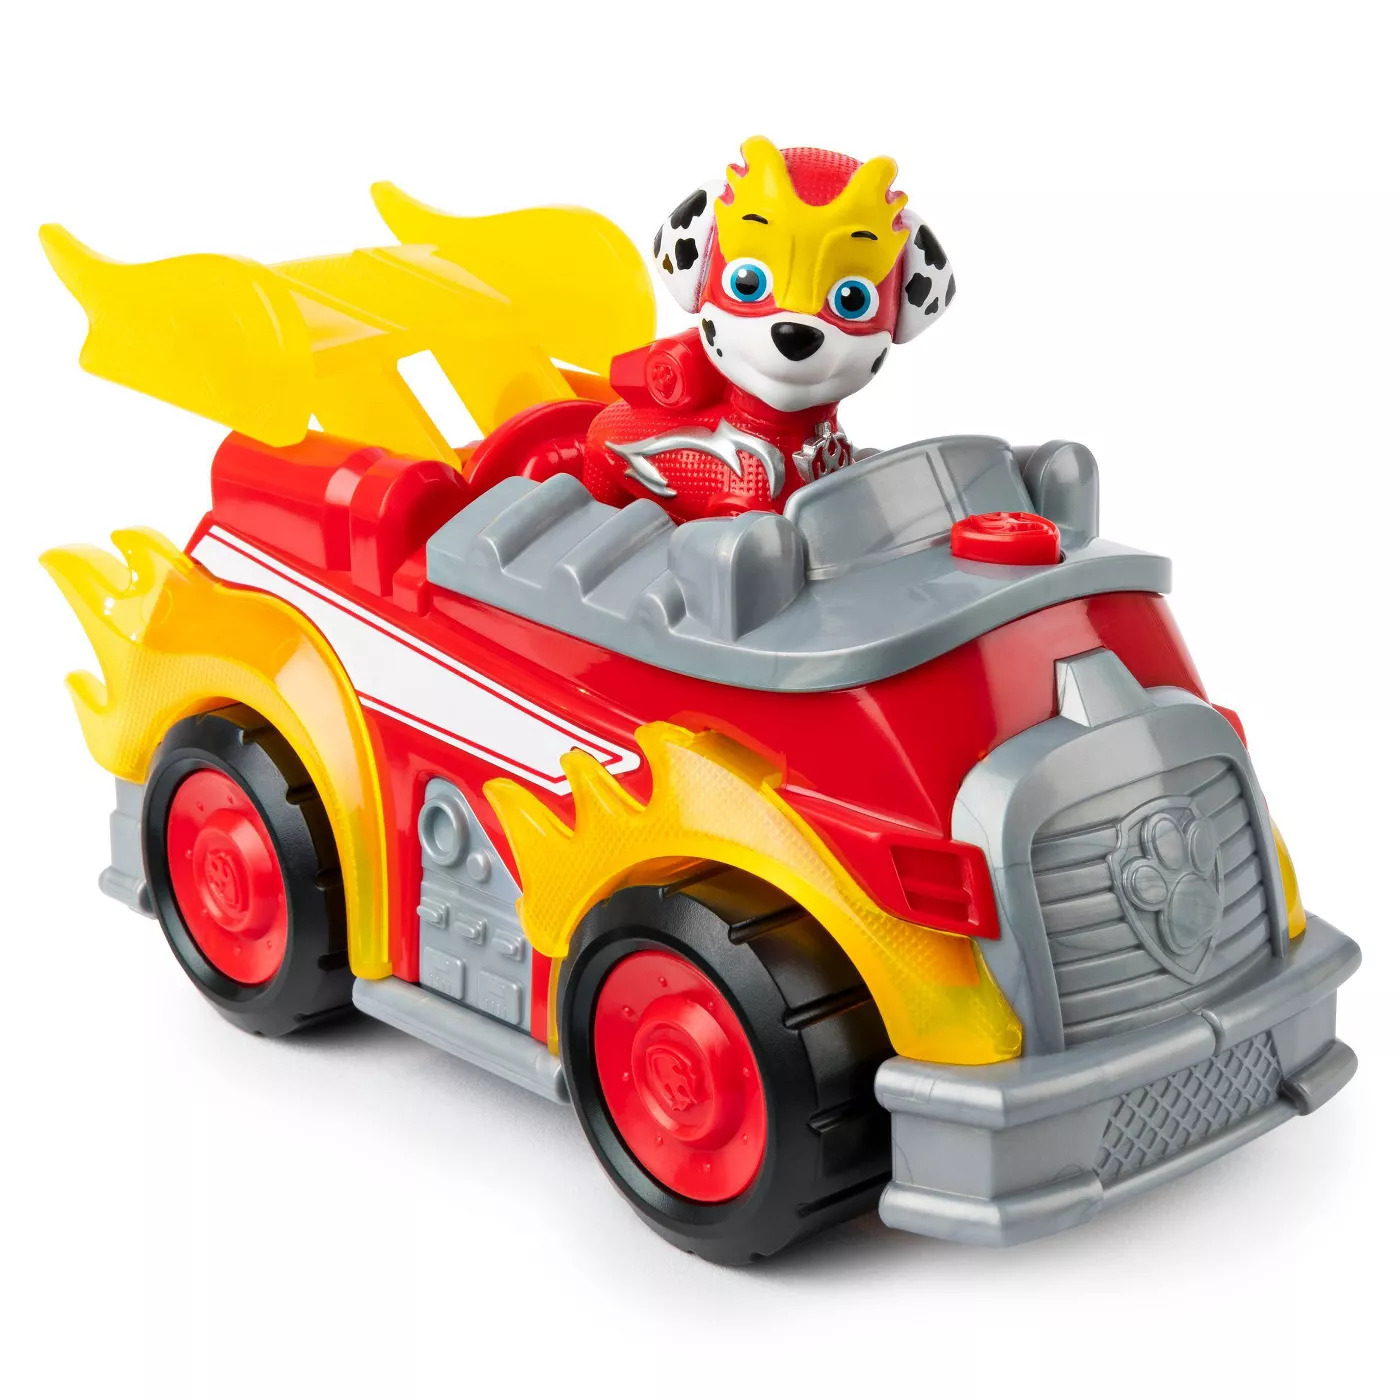 Paw Patrol Mighty Pups Super Paw Marshall Deluxe Vehicle